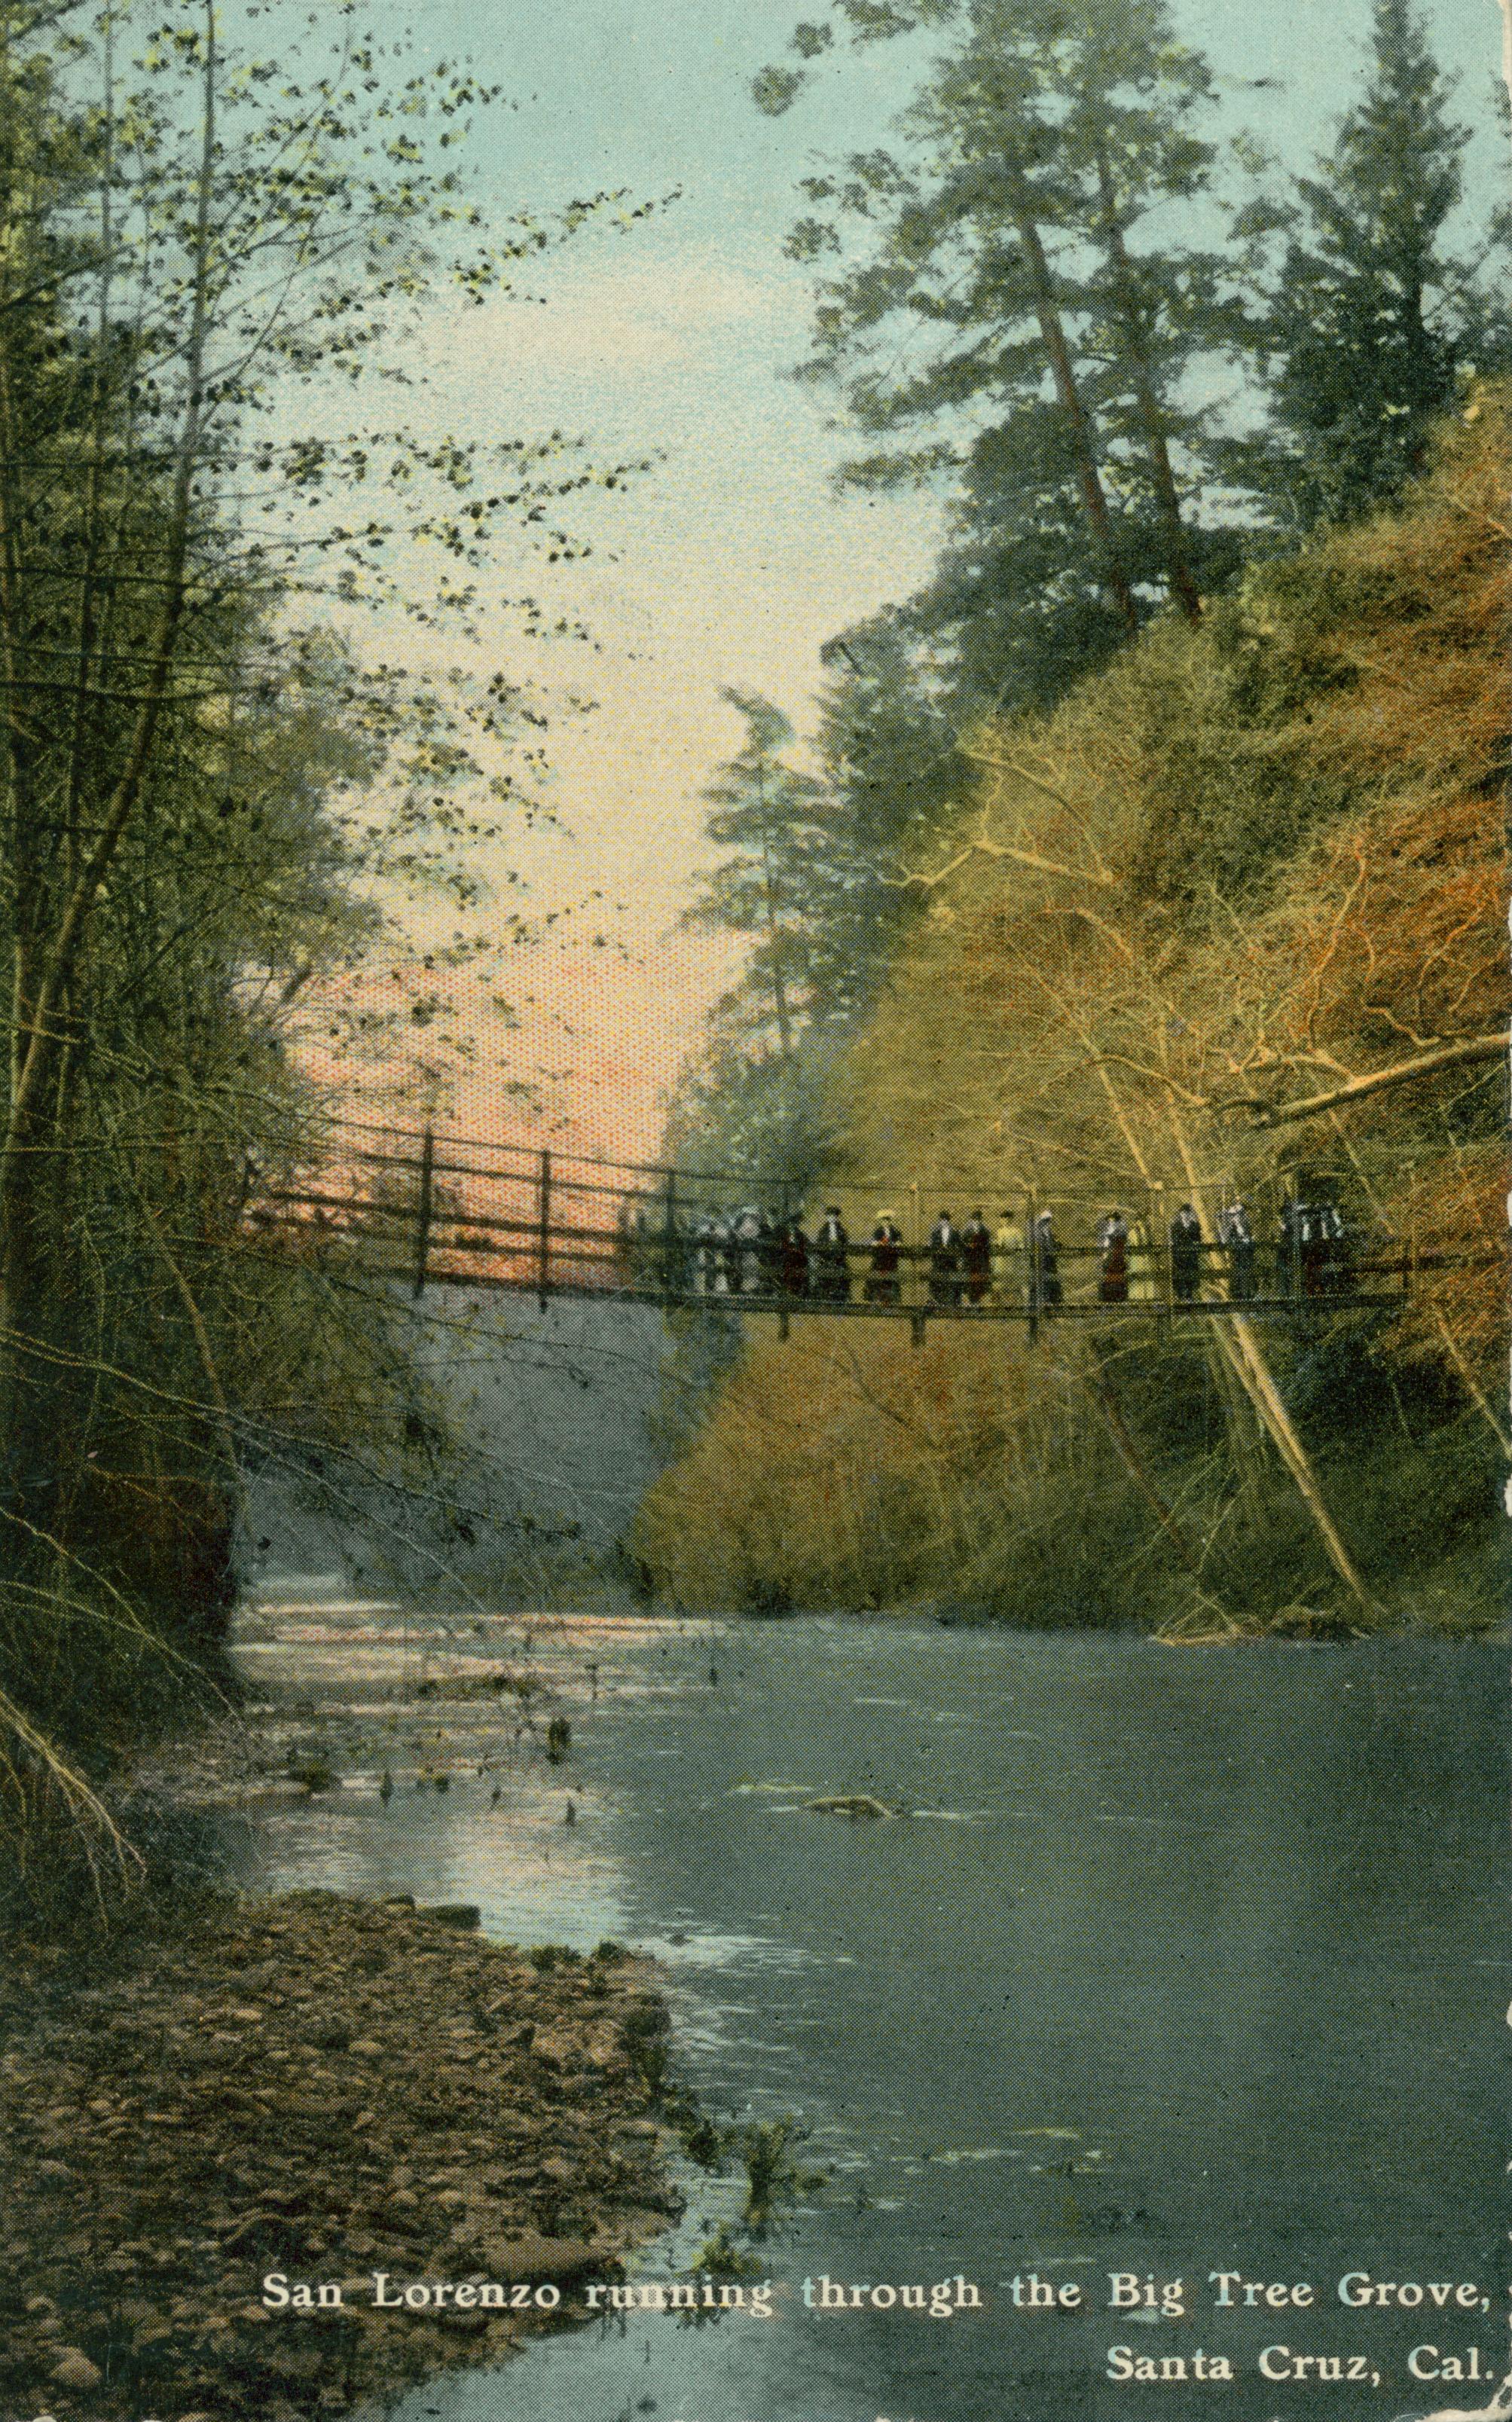 Shows a bridge over a river with several people standing on it.